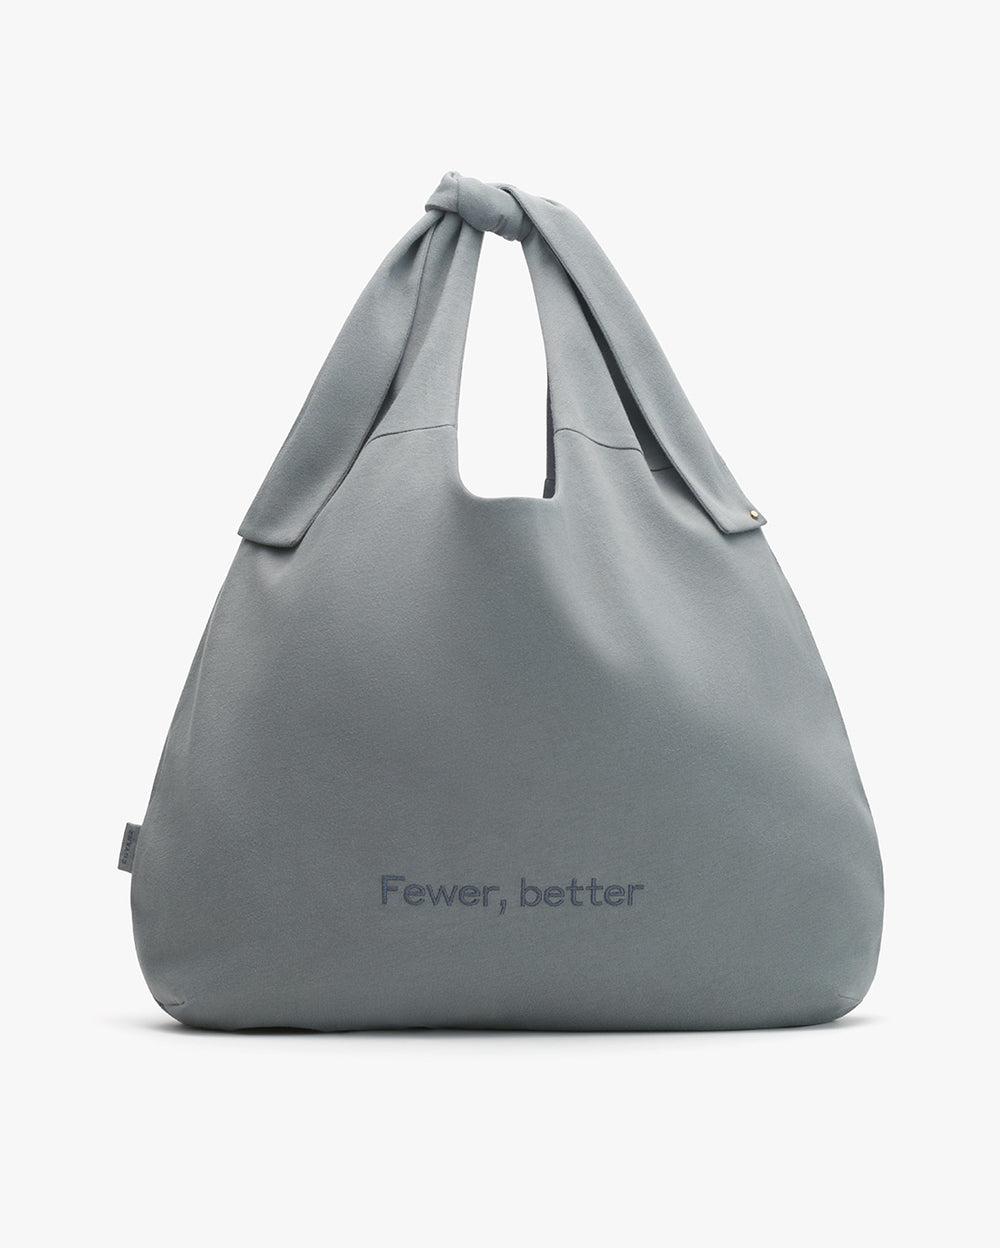 Handbag with handle and the text 'Fewer, better' printed on the front.